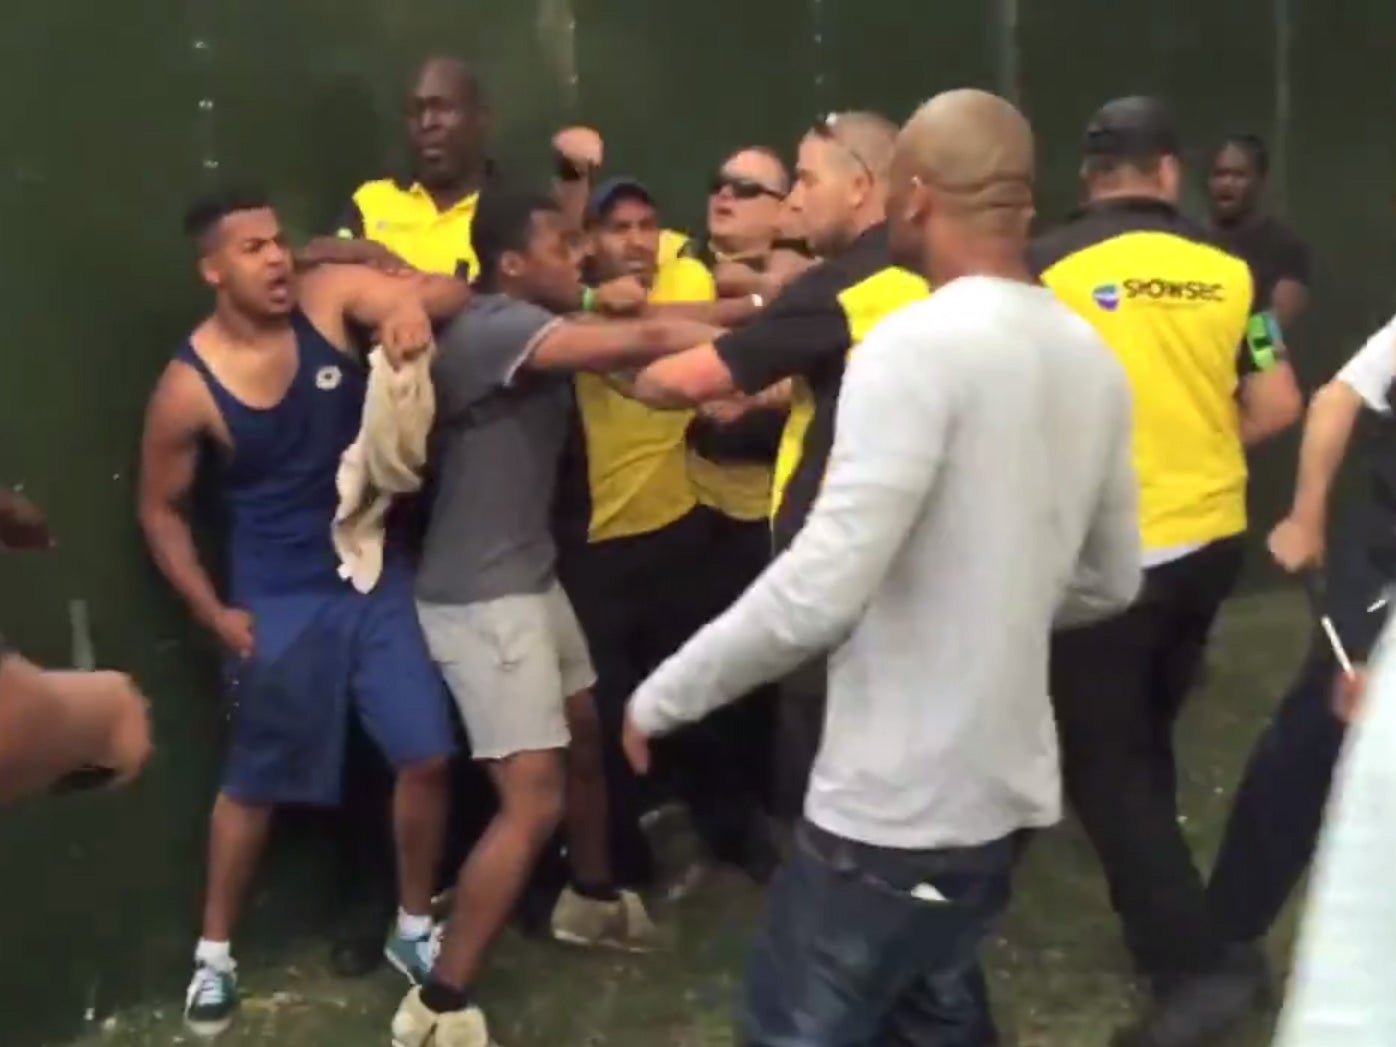 Crowd tying to gatecrash Wireless festival fights with security guards